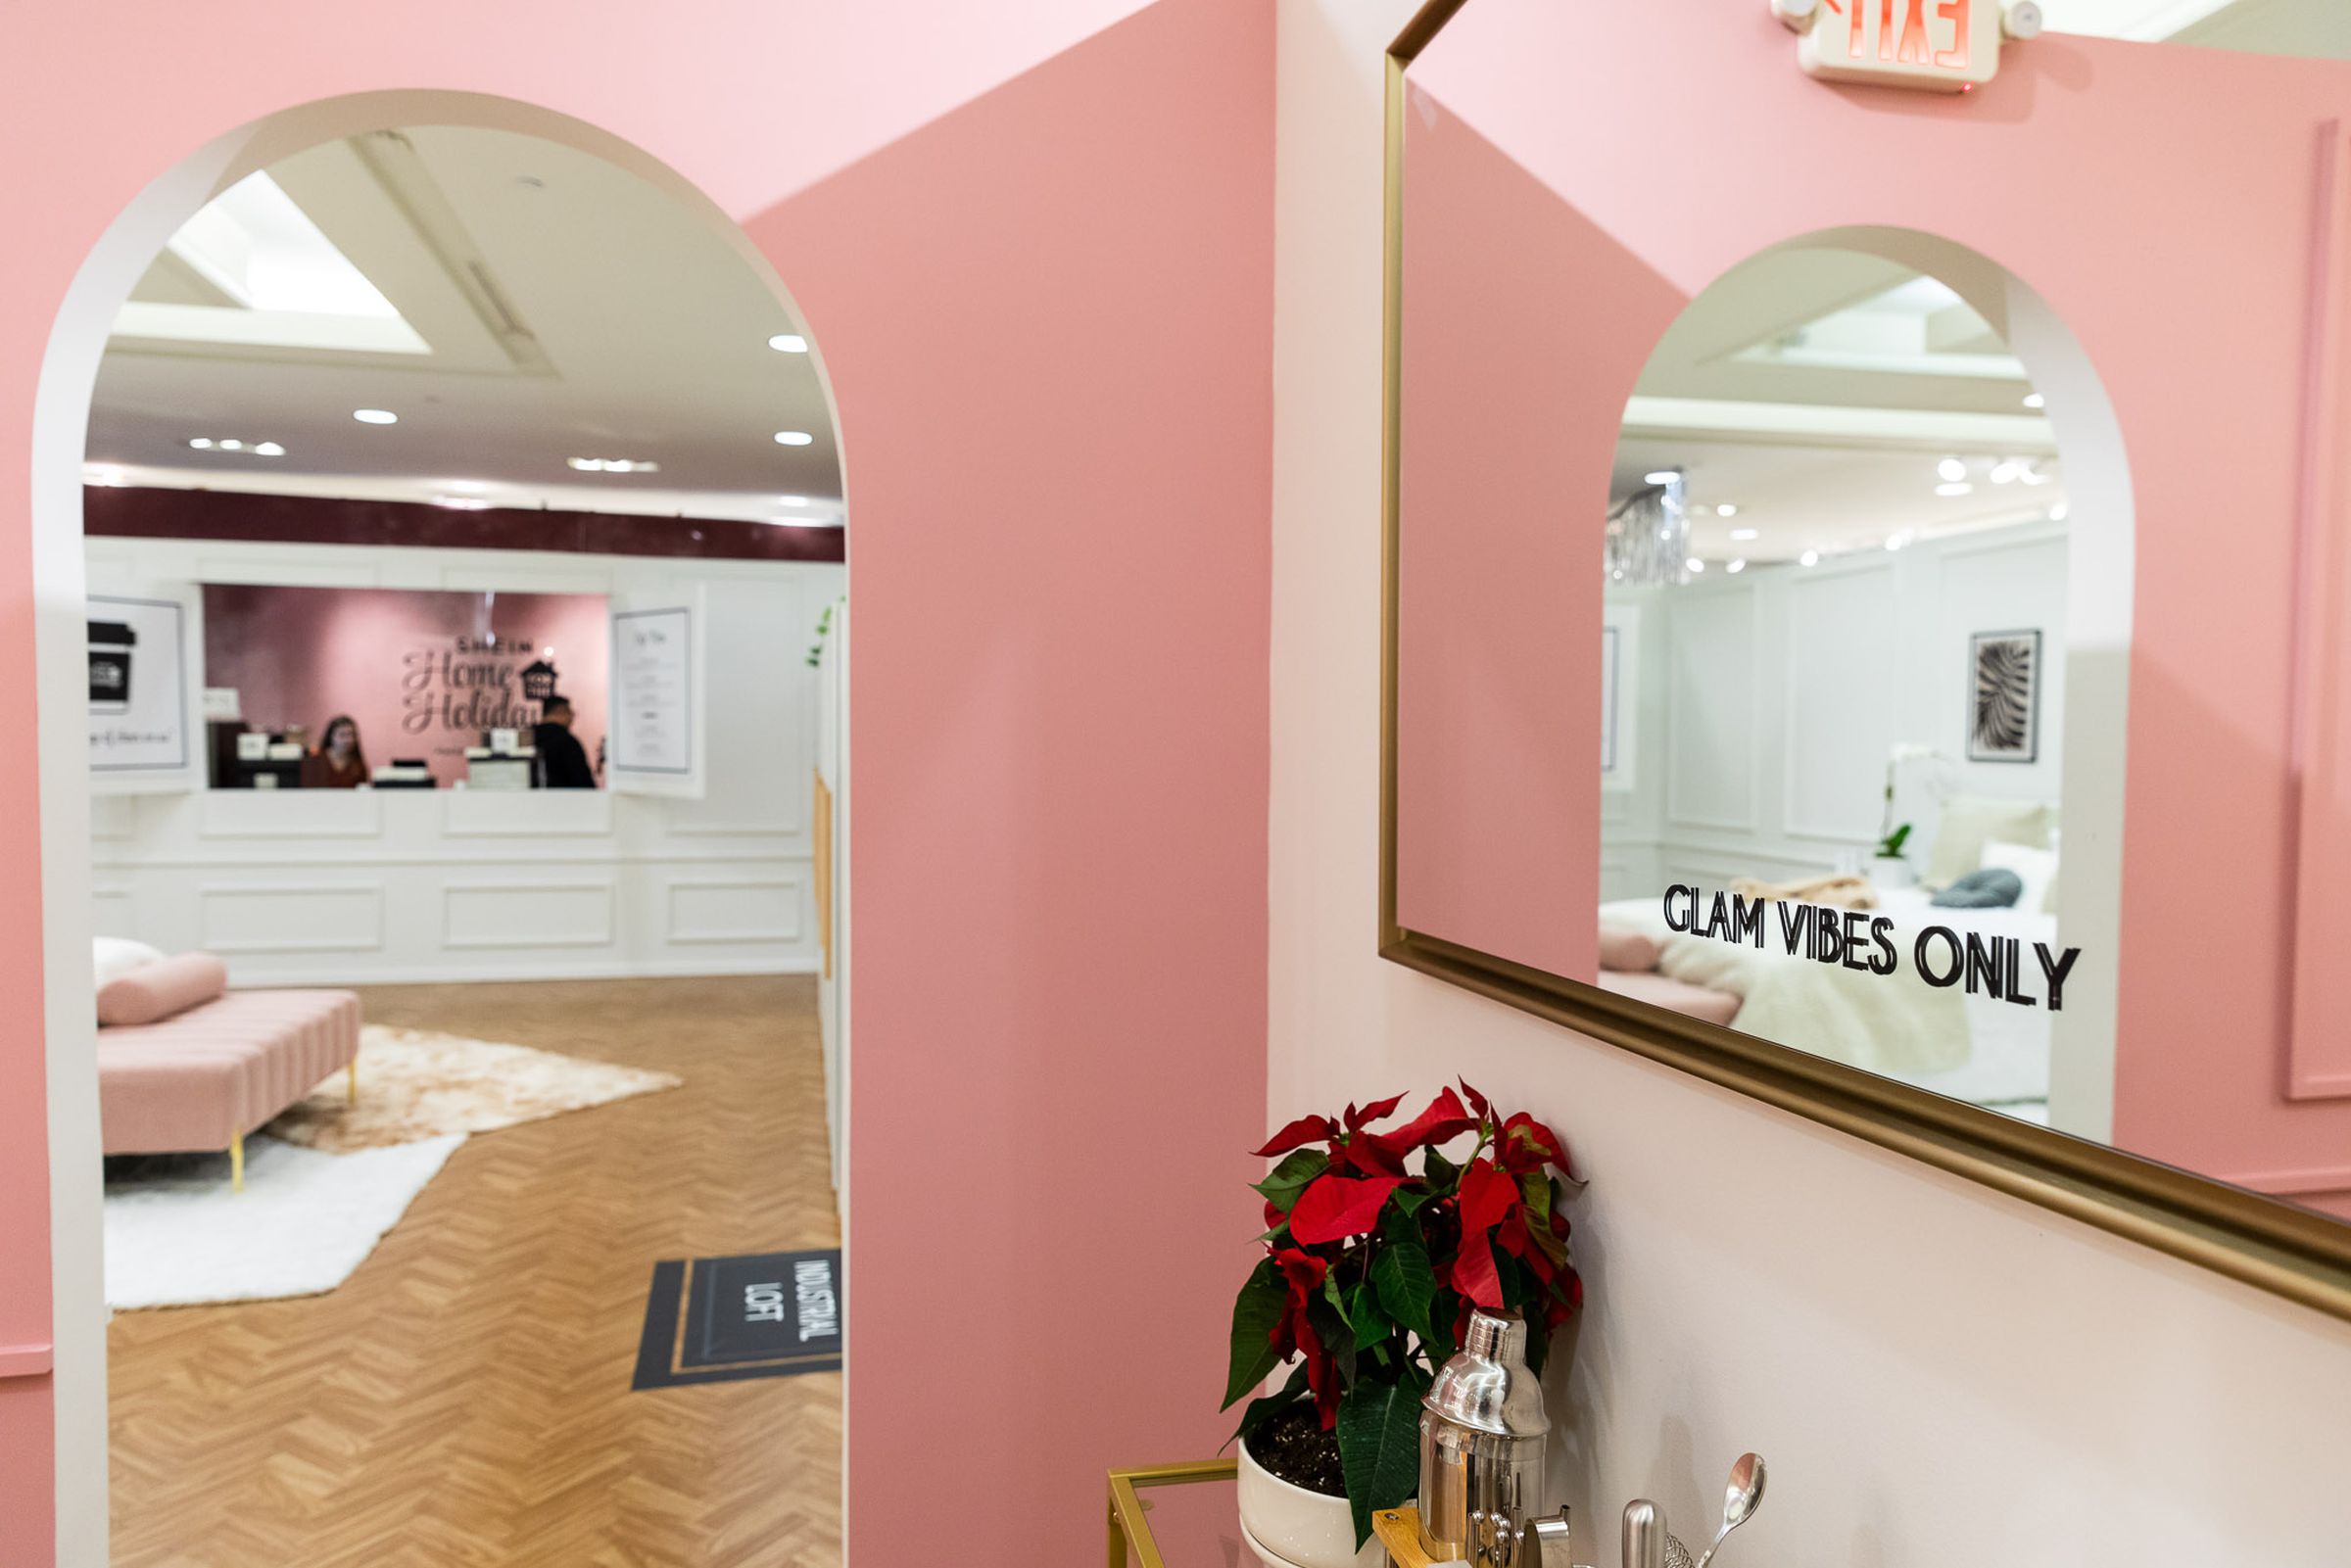 The Shein Times Square event was in a large, staged home constructed inside Forever 21. The walls are pink, with a mirror hanging that reads, “GLAM VIBES ONLY.” 